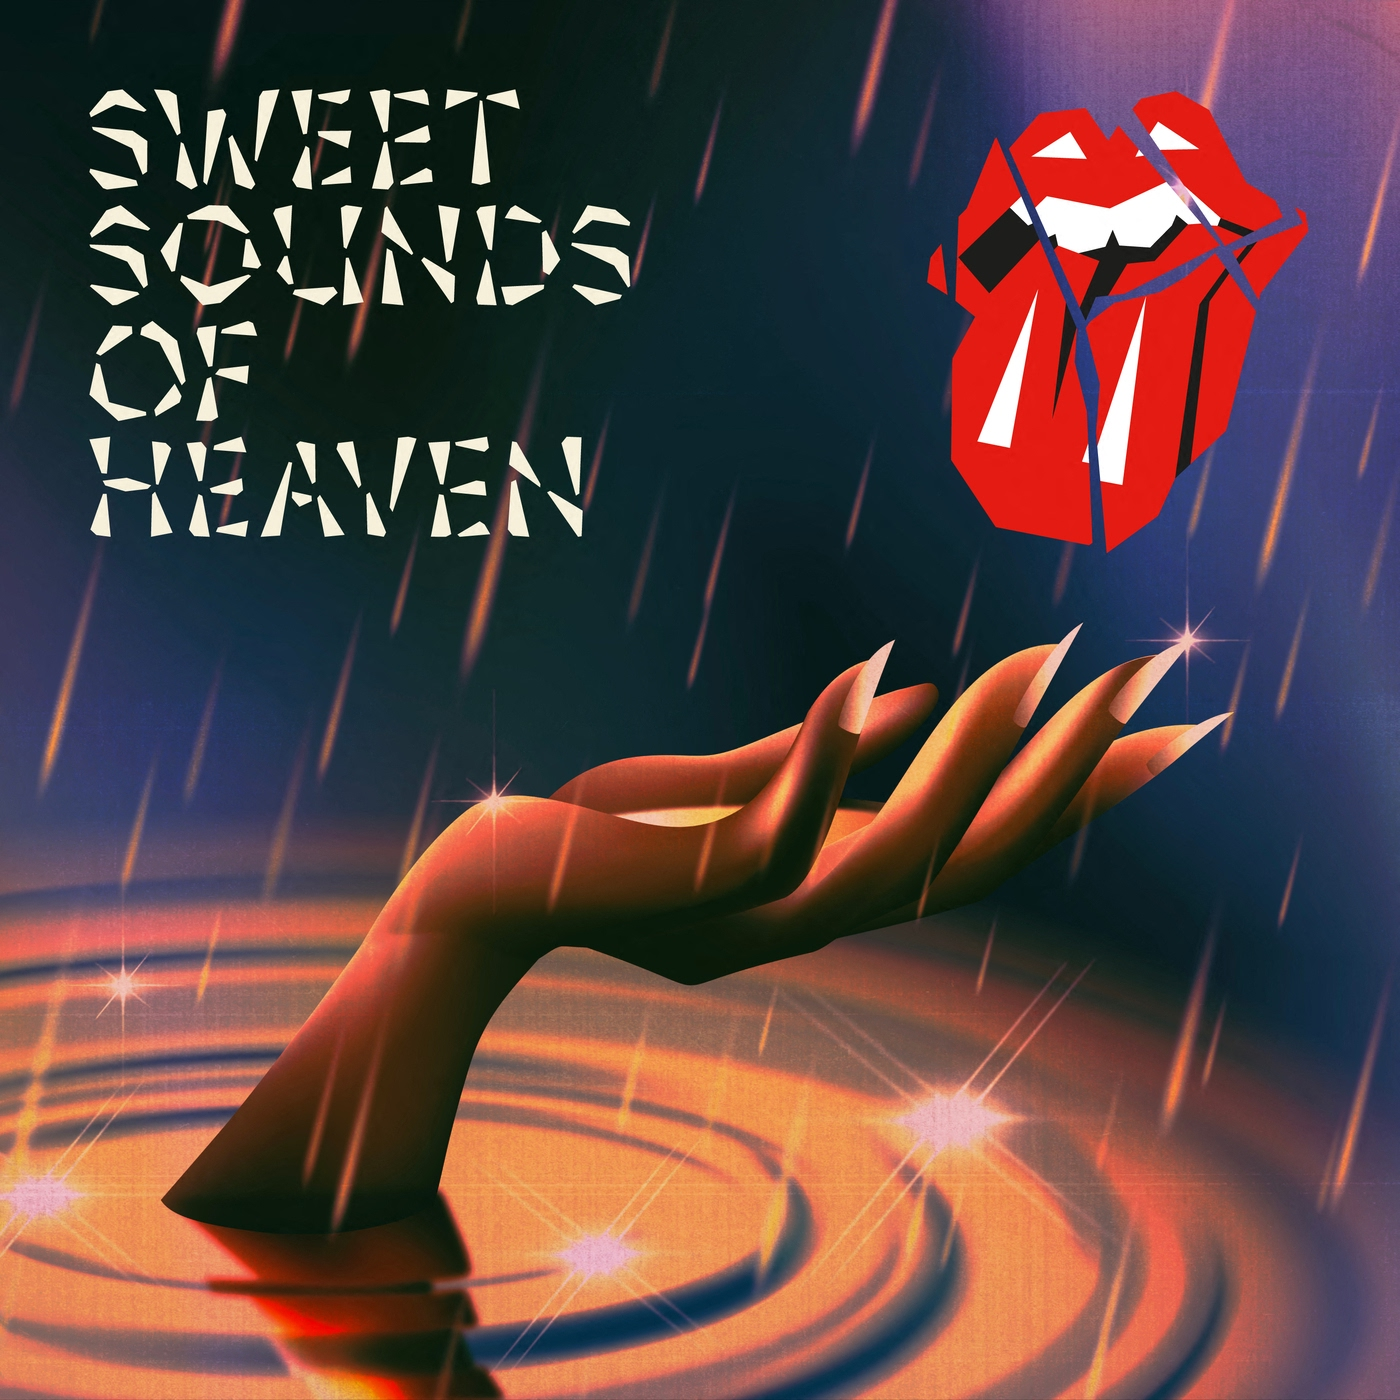 THE ROLLING STONES - Sweet Sounds Of Heaven (Limited 10" Single) Vinyl